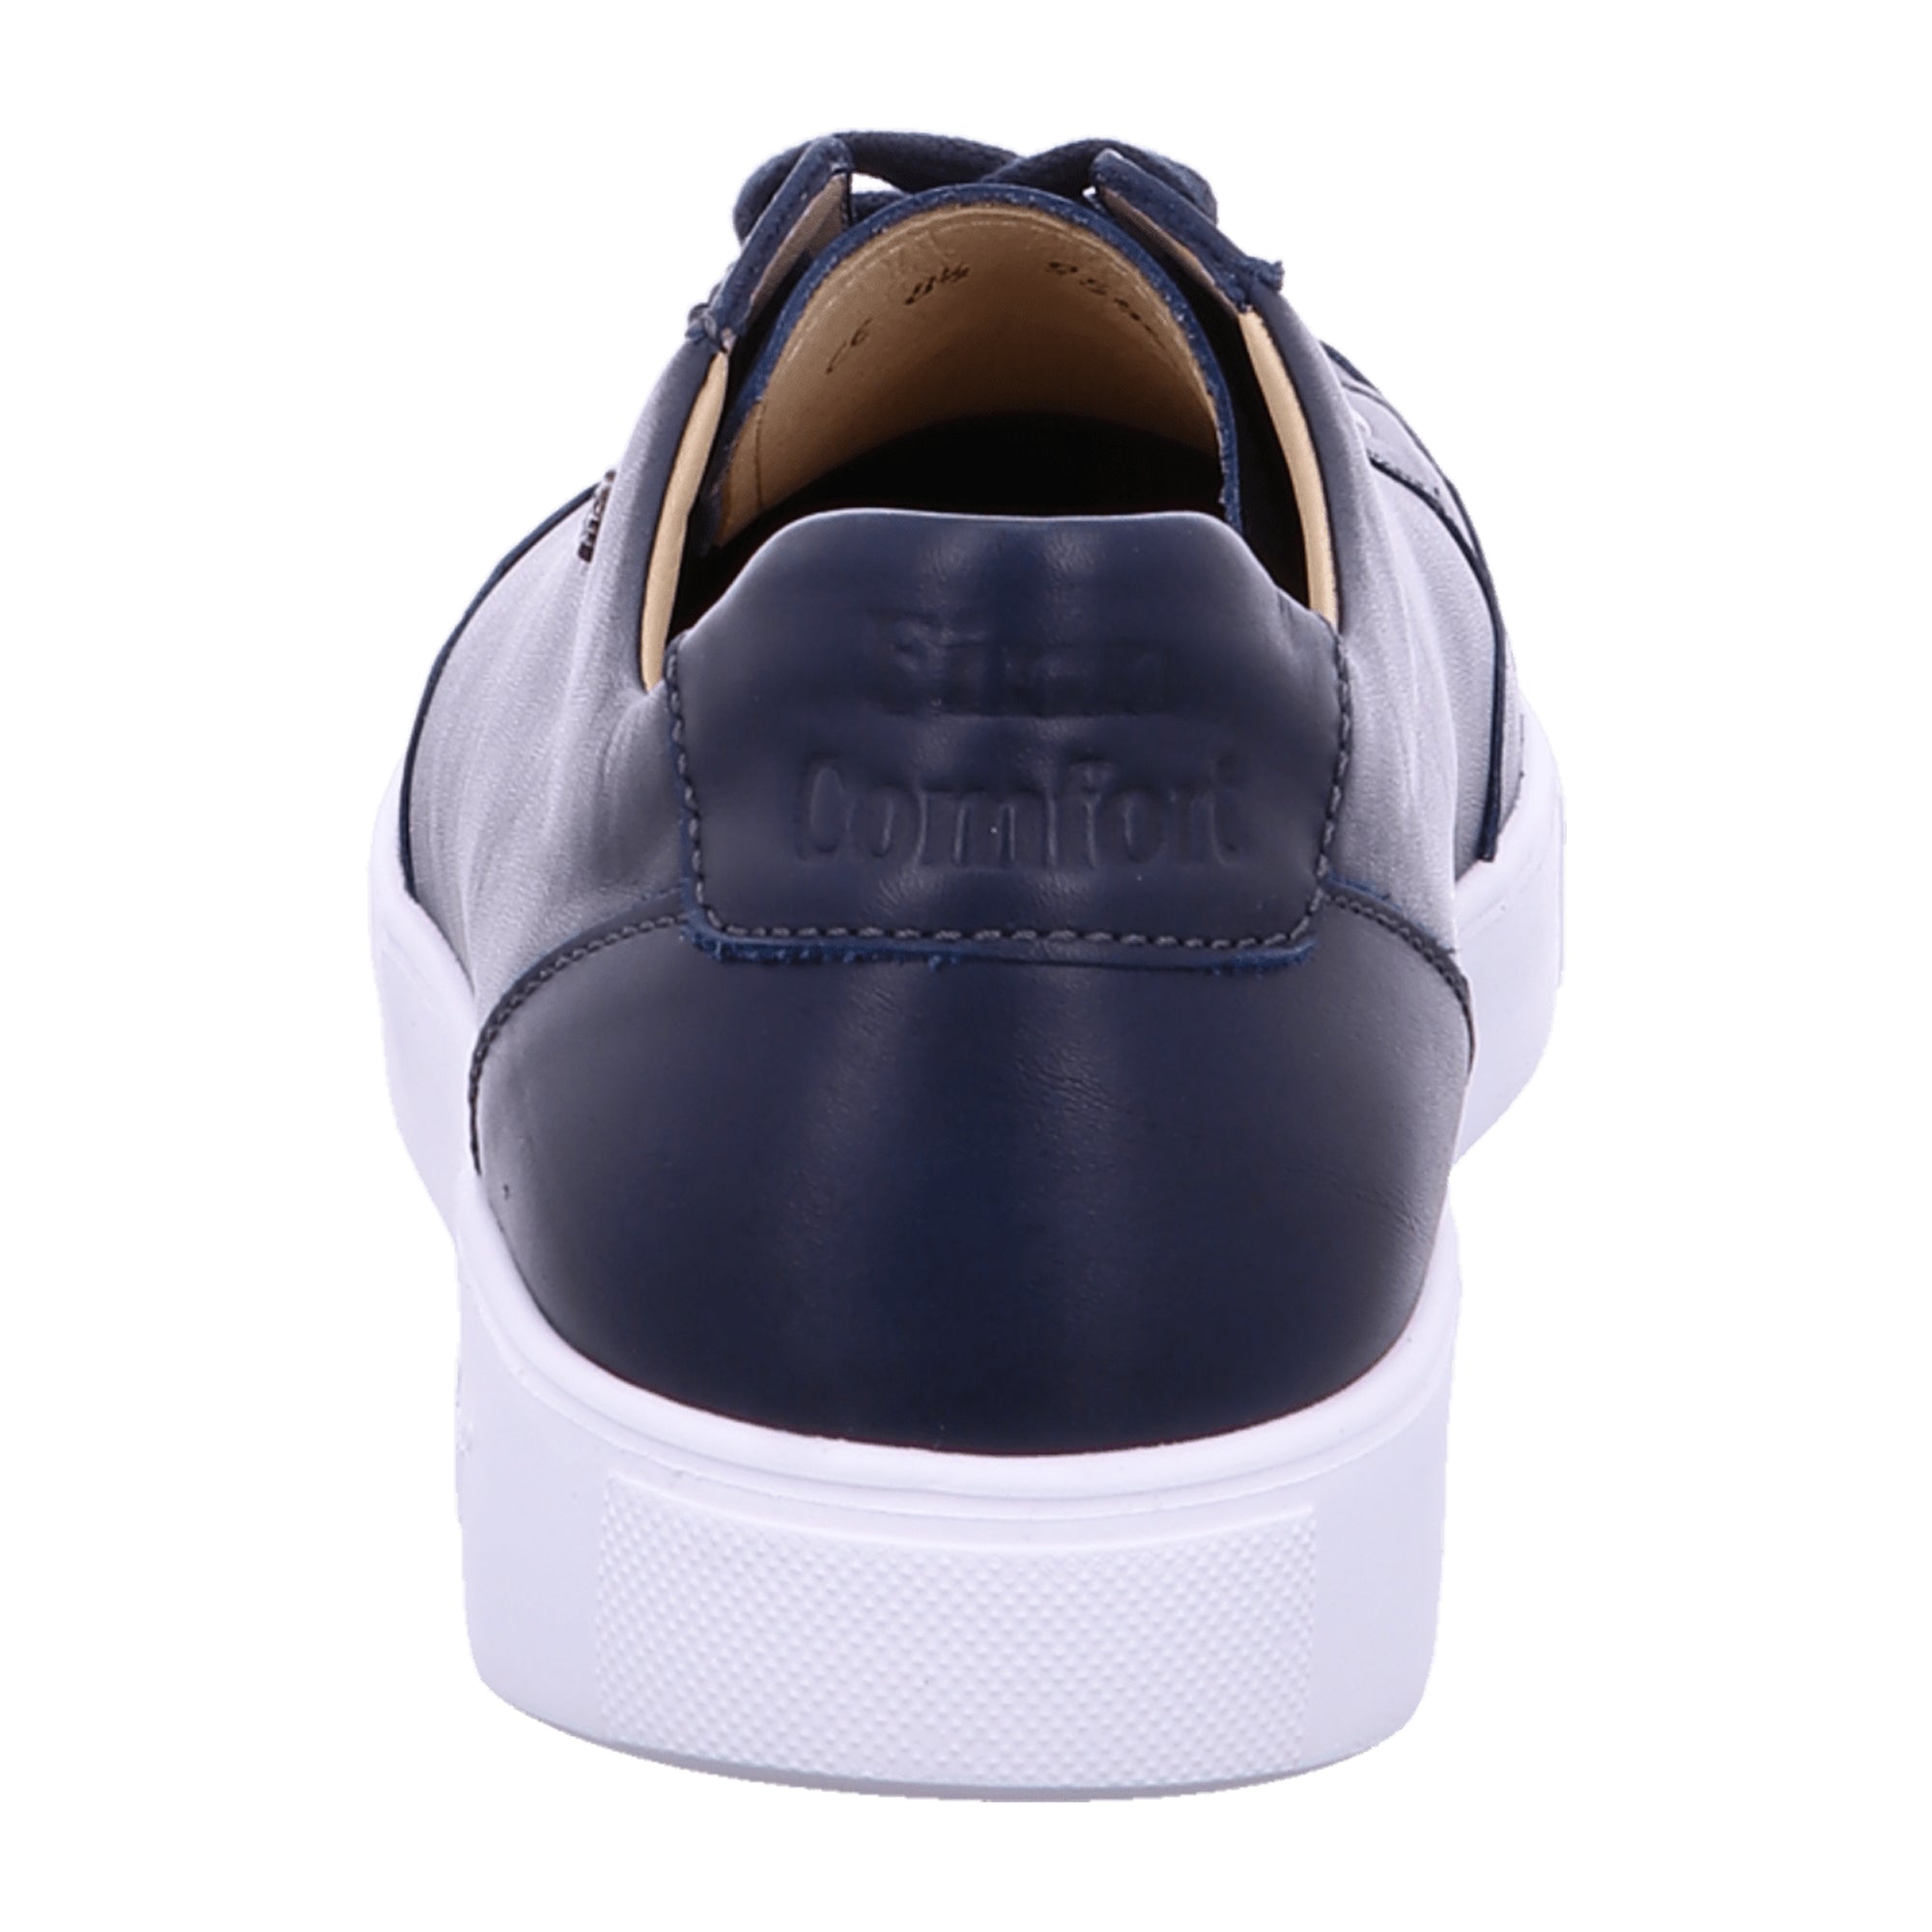 Finn Comfort Piccadilly Men's Shoes - Stylish & Durable Imported Blue Footwear